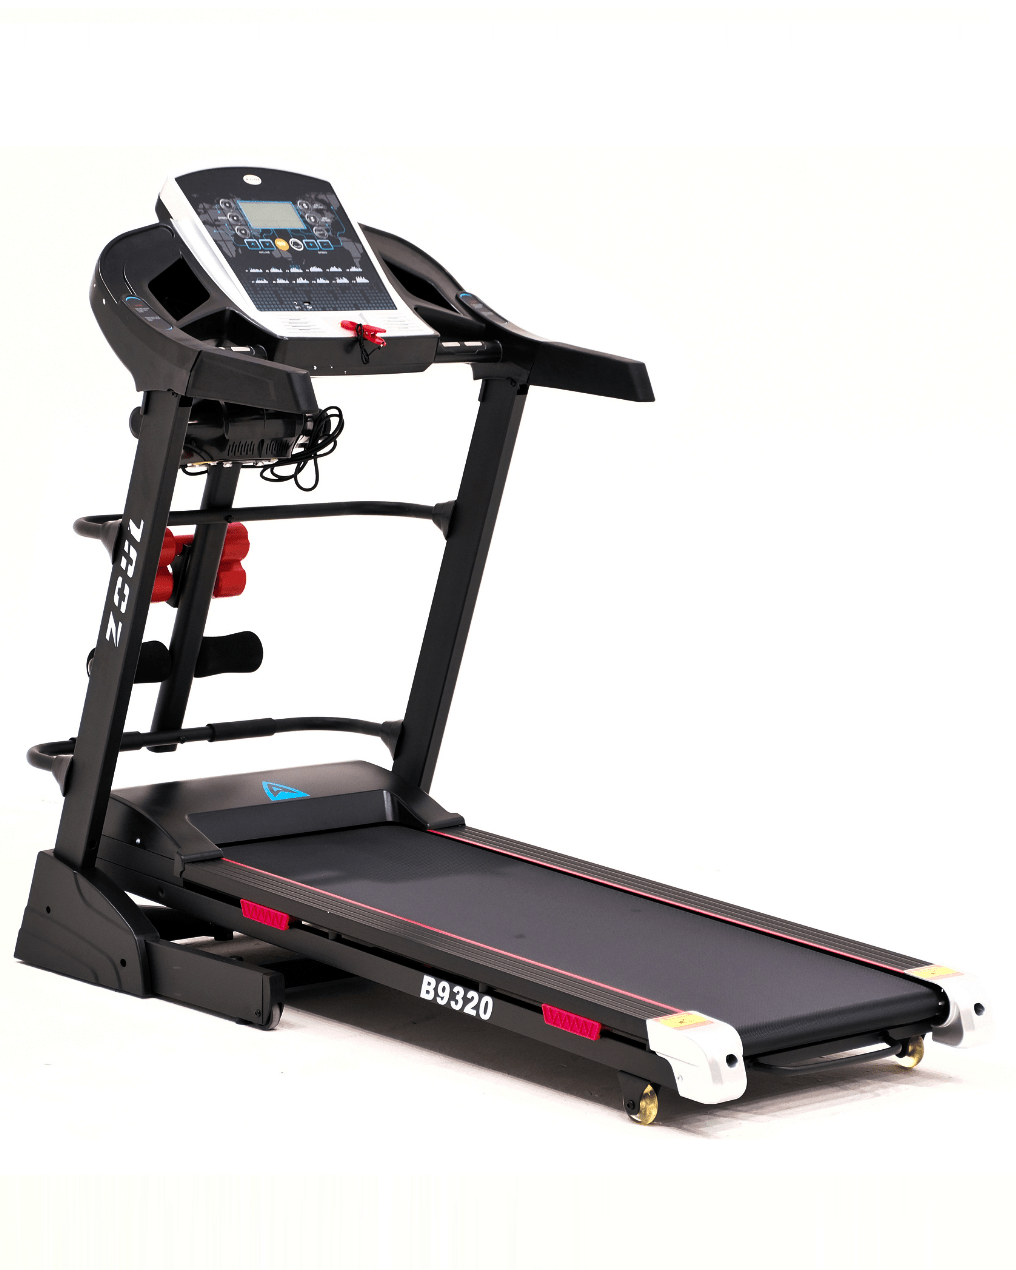 Zoul Fitness B9320 (3.5 HP Peak Motor) Digital Treadmill for Home Use | Automatic Inclination - zoulfitness